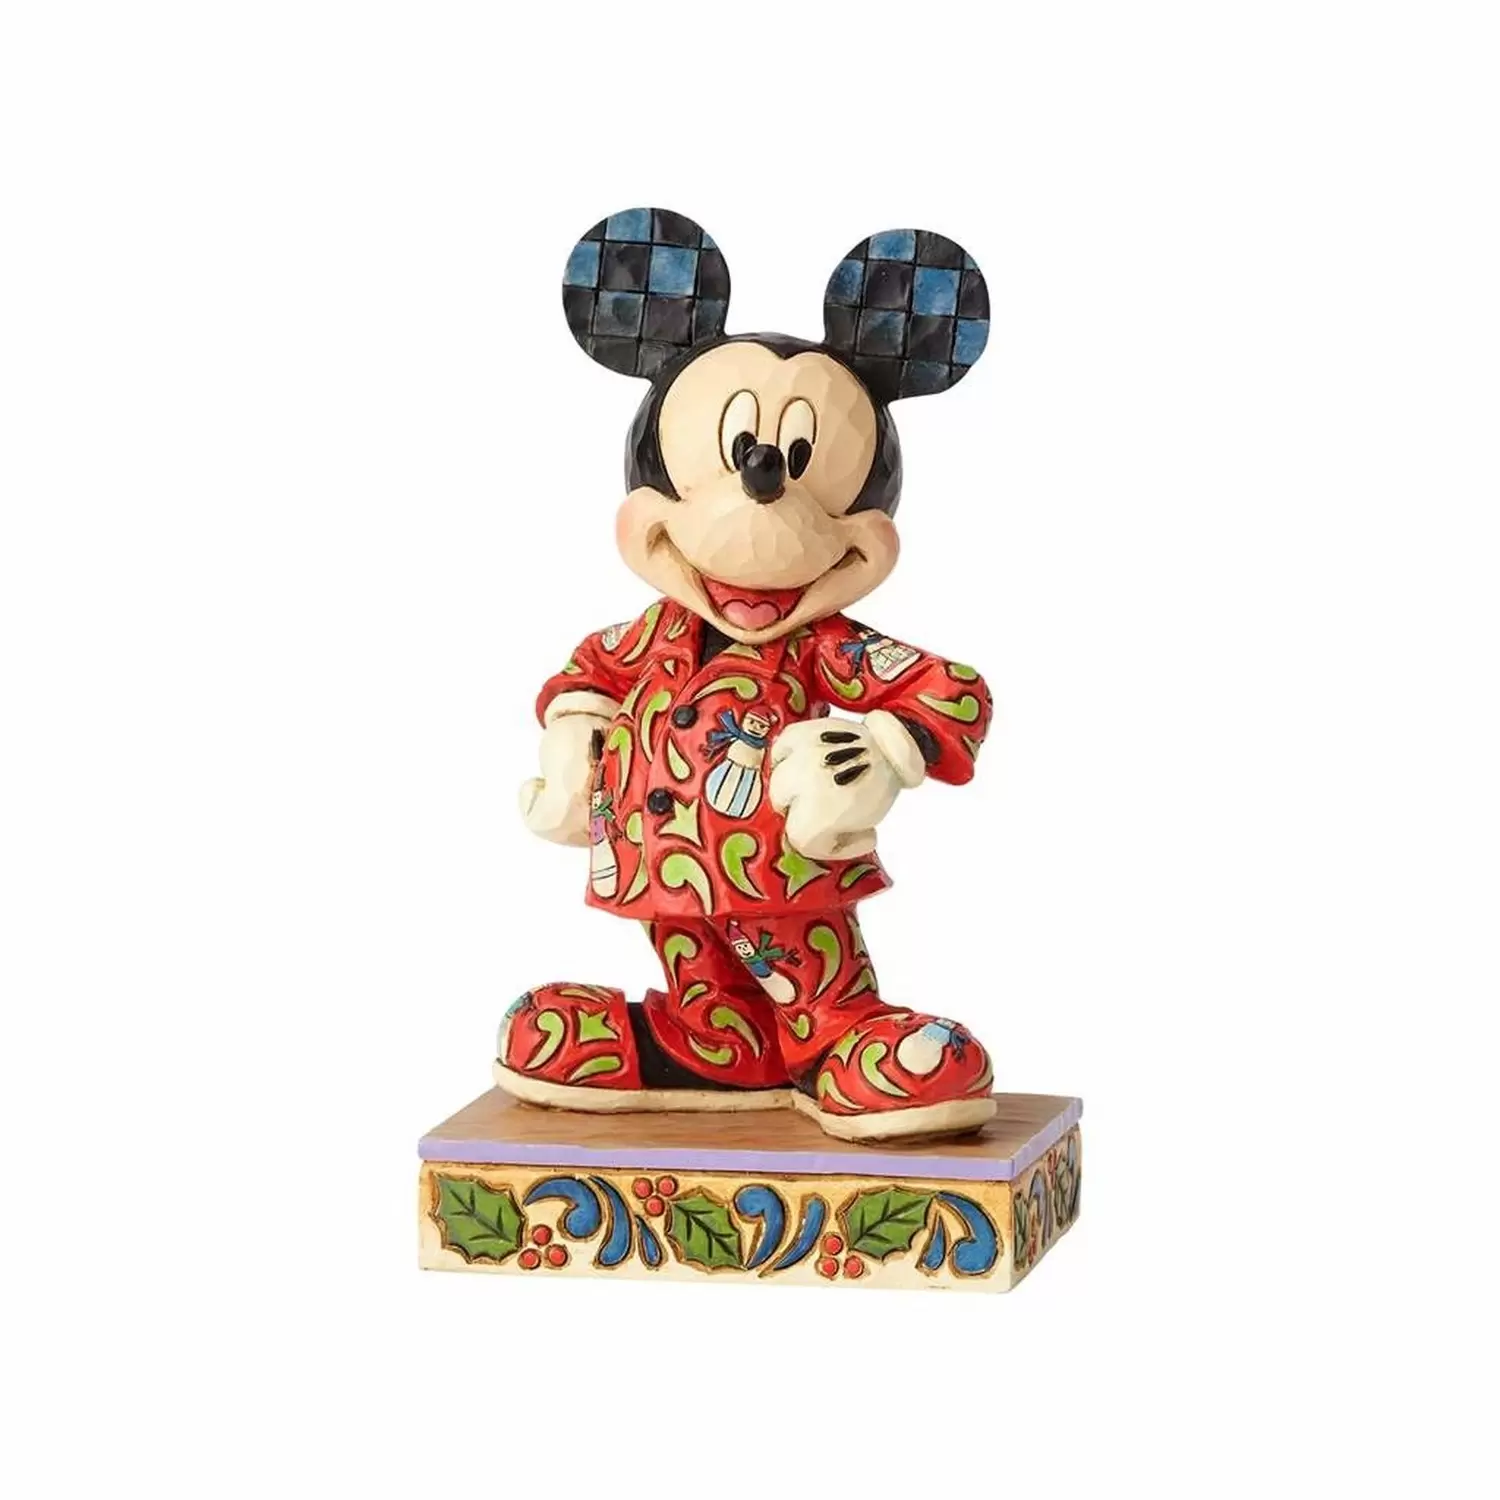 Disney Traditions by Jim Shore - Magical Morning - Mickey in Christmas Pajamas